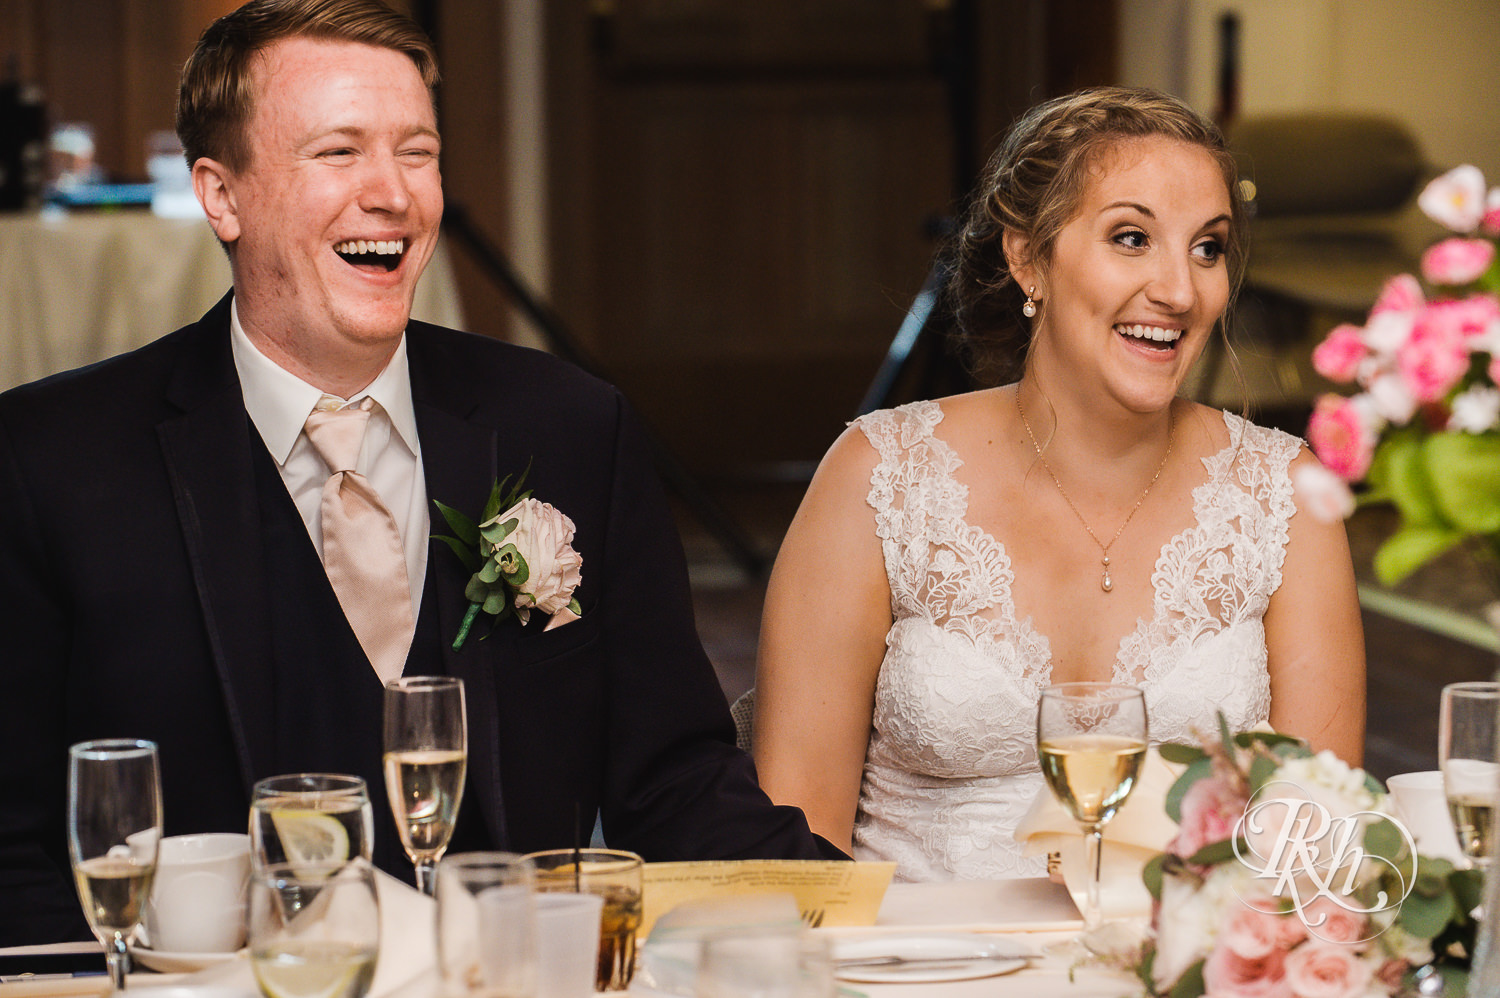 Bride and groom laugh during speeches at wedding reception at Earle Brown Heritage Center in Brooklyn Center, Minnesota.